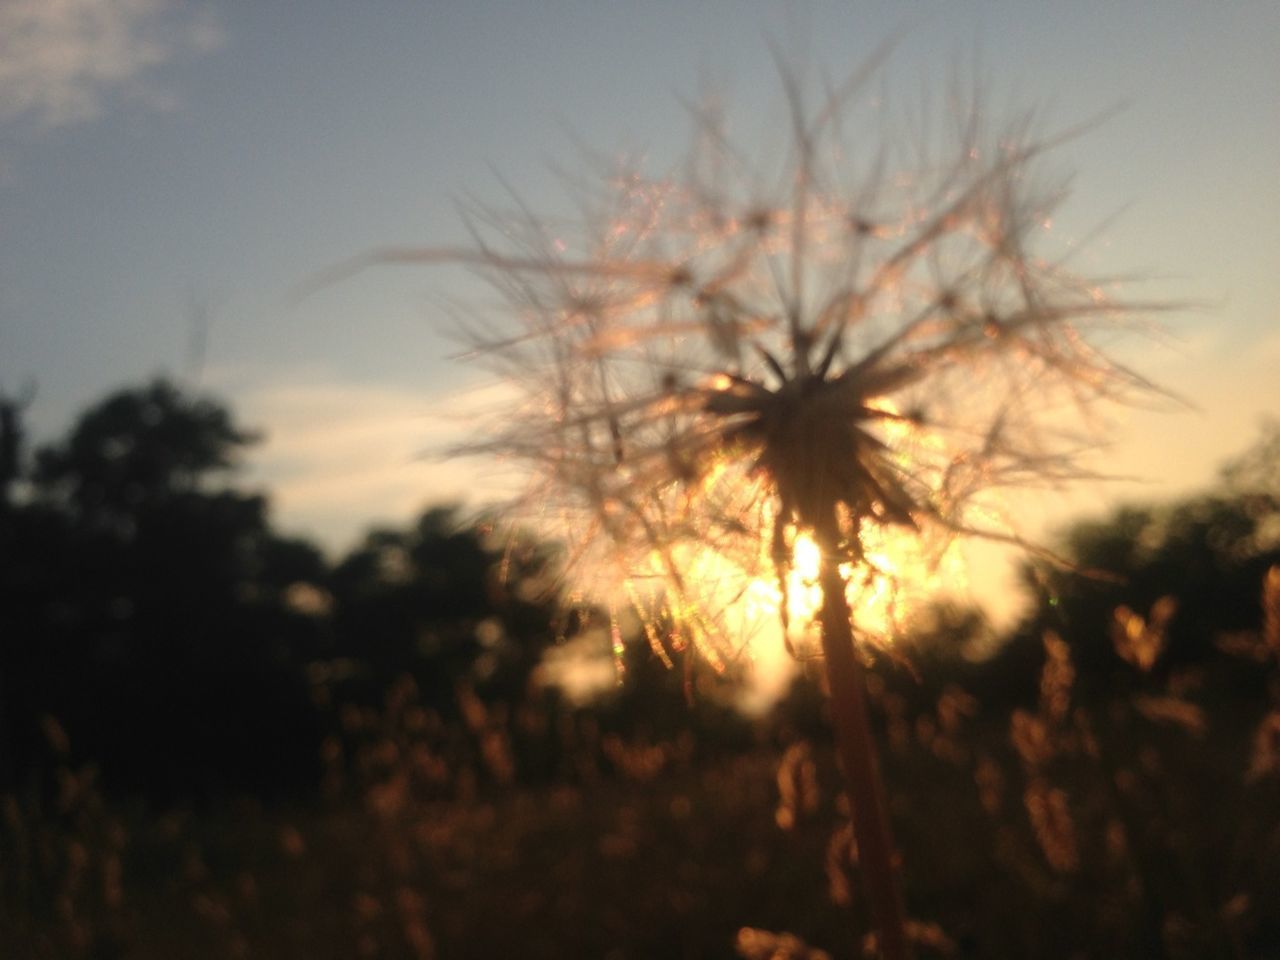 growth, flower, focus on foreground, nature, beauty in nature, sunset, silhouette, plant, dandelion, sky, stem, close-up, field, freshness, fragility, tranquility, selective focus, outdoors, no people, dusk